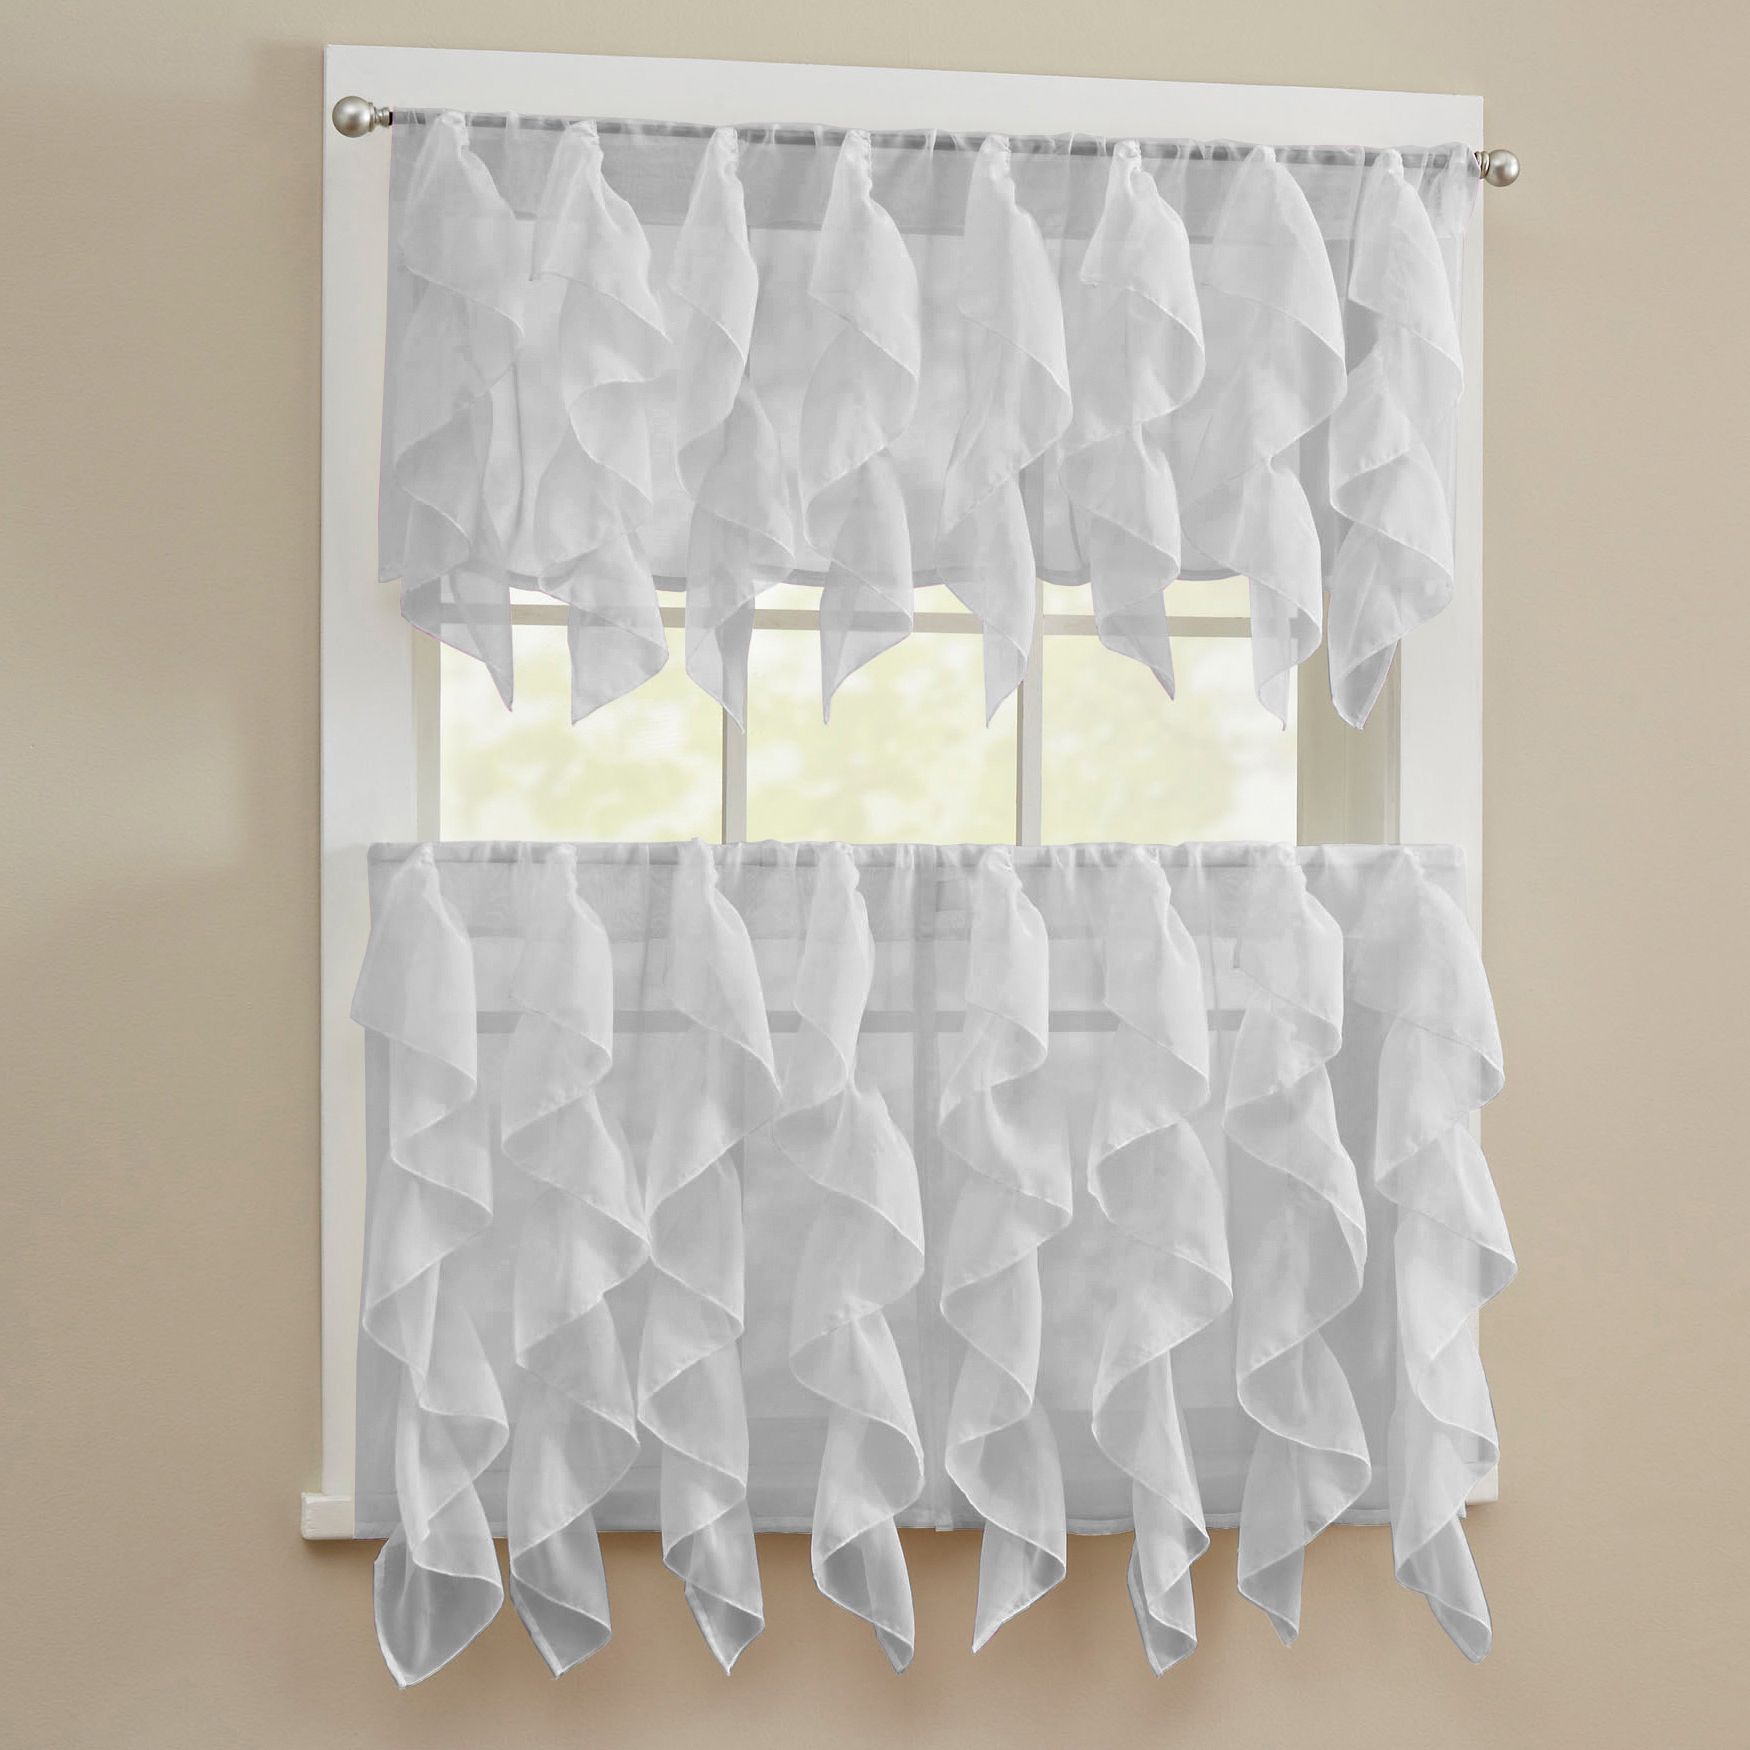 Details About Sheer Voile Vertical Ruffle Window Kitchen Curtain Tiers Or  Valance Silver Pertaining To Vertical Ruffled Waterfall Valance And Curtain Tiers (Photo 7 of 20)